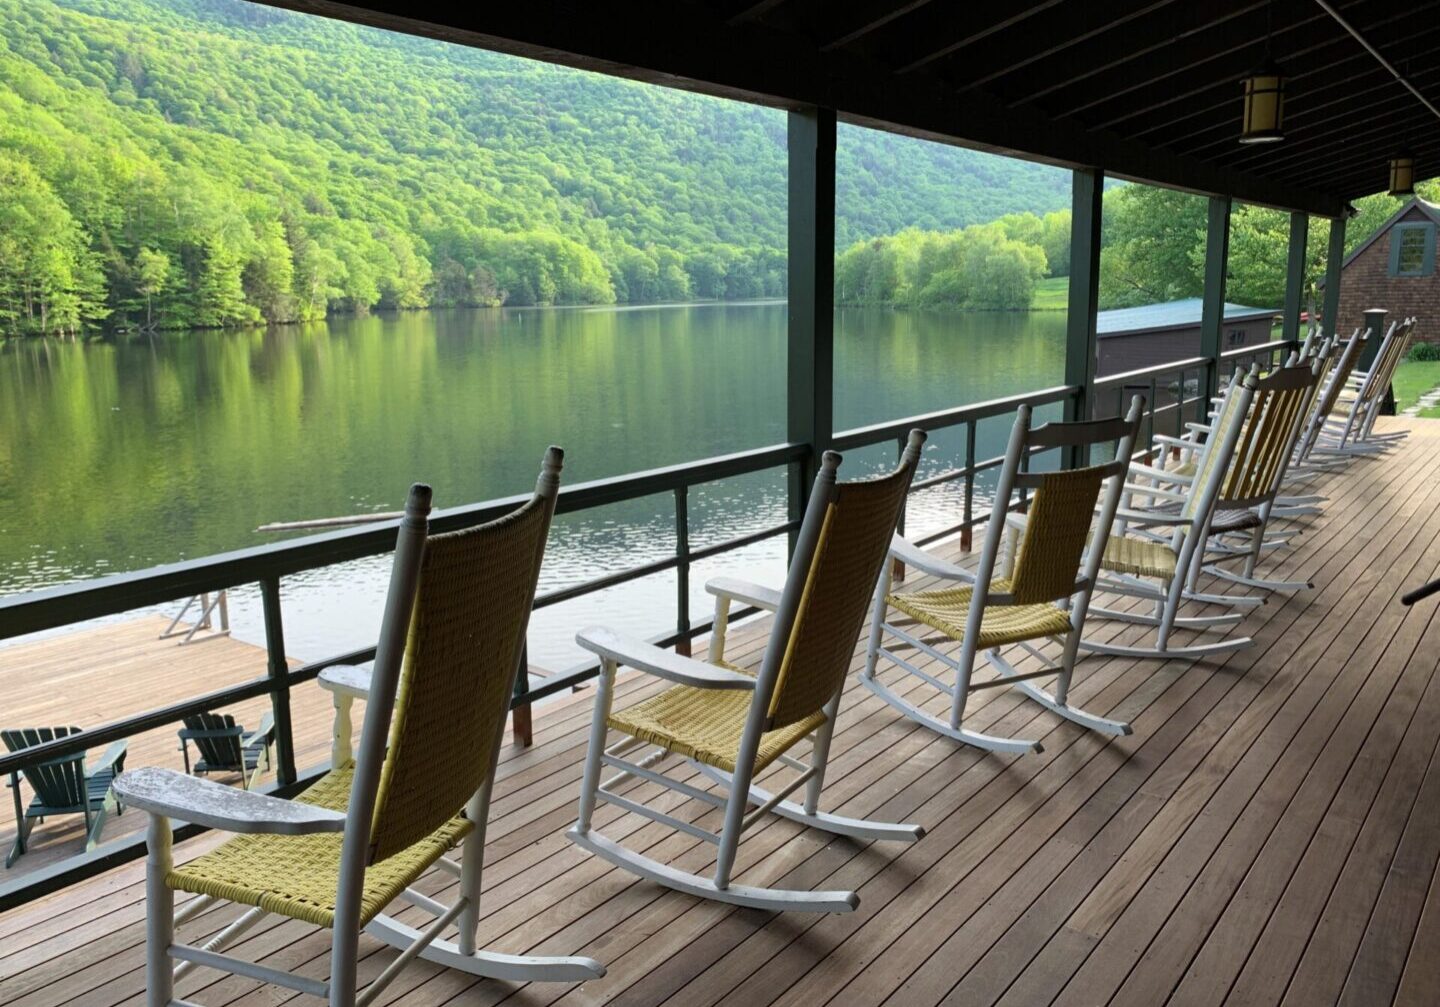 A row of rocking chairs on the deck overlooking a lake.